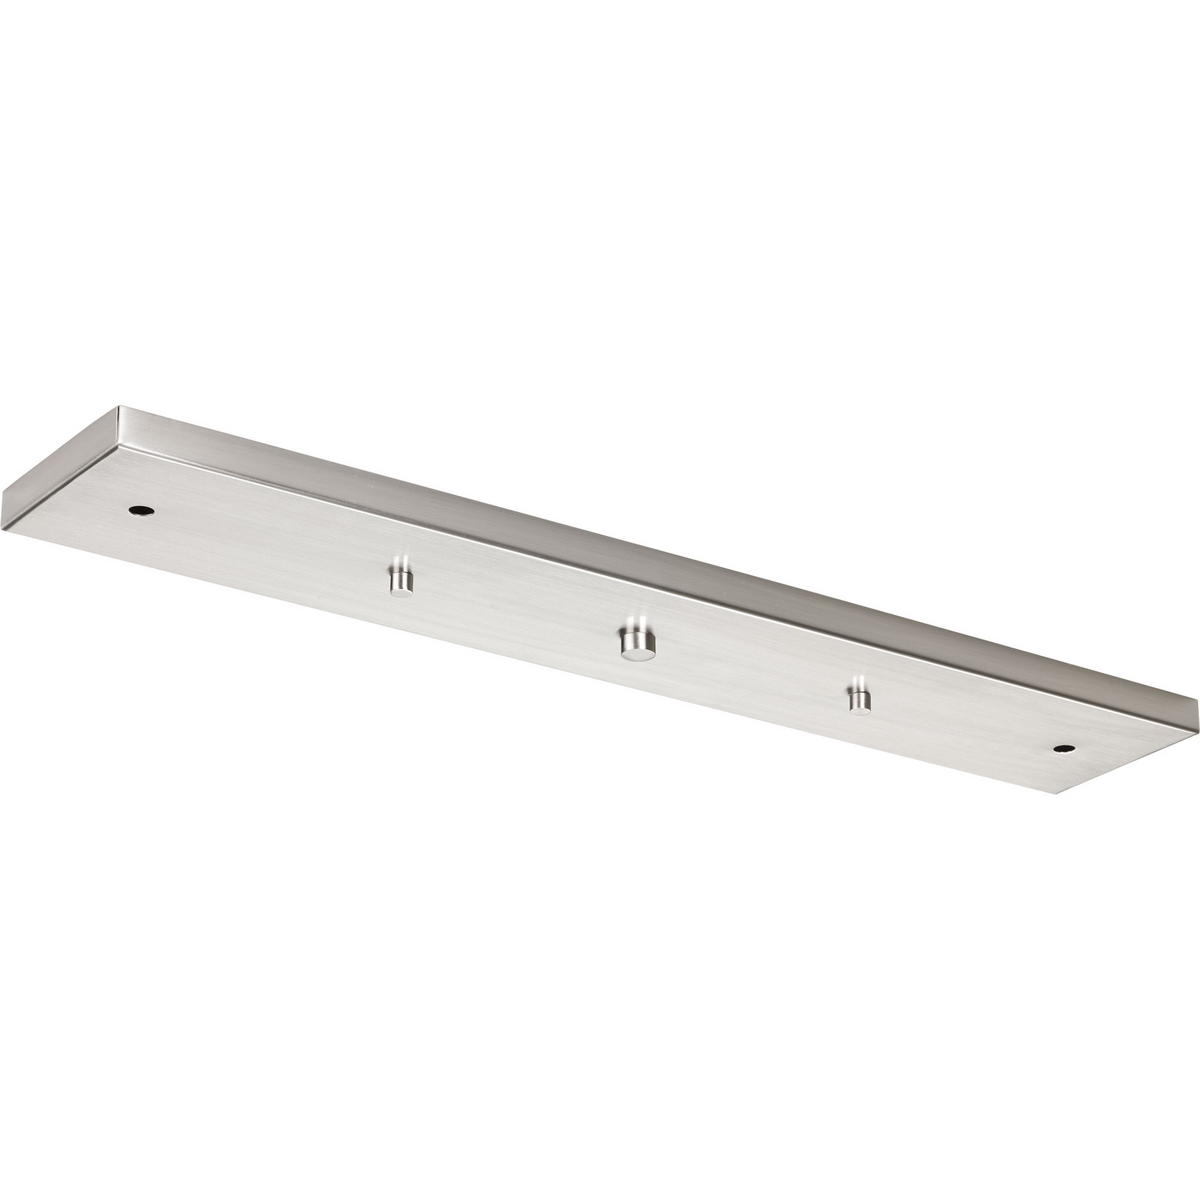 This linear pendant accessory allows for the hanging of 2 or 3 pendants off of one outlet box. Pendants can be mounted staggered or in line. The maximum pendant width for three pendants is 9 inch each. The maximum pendant width for two pendants is 18 inch each. Brushed Nickel finish.